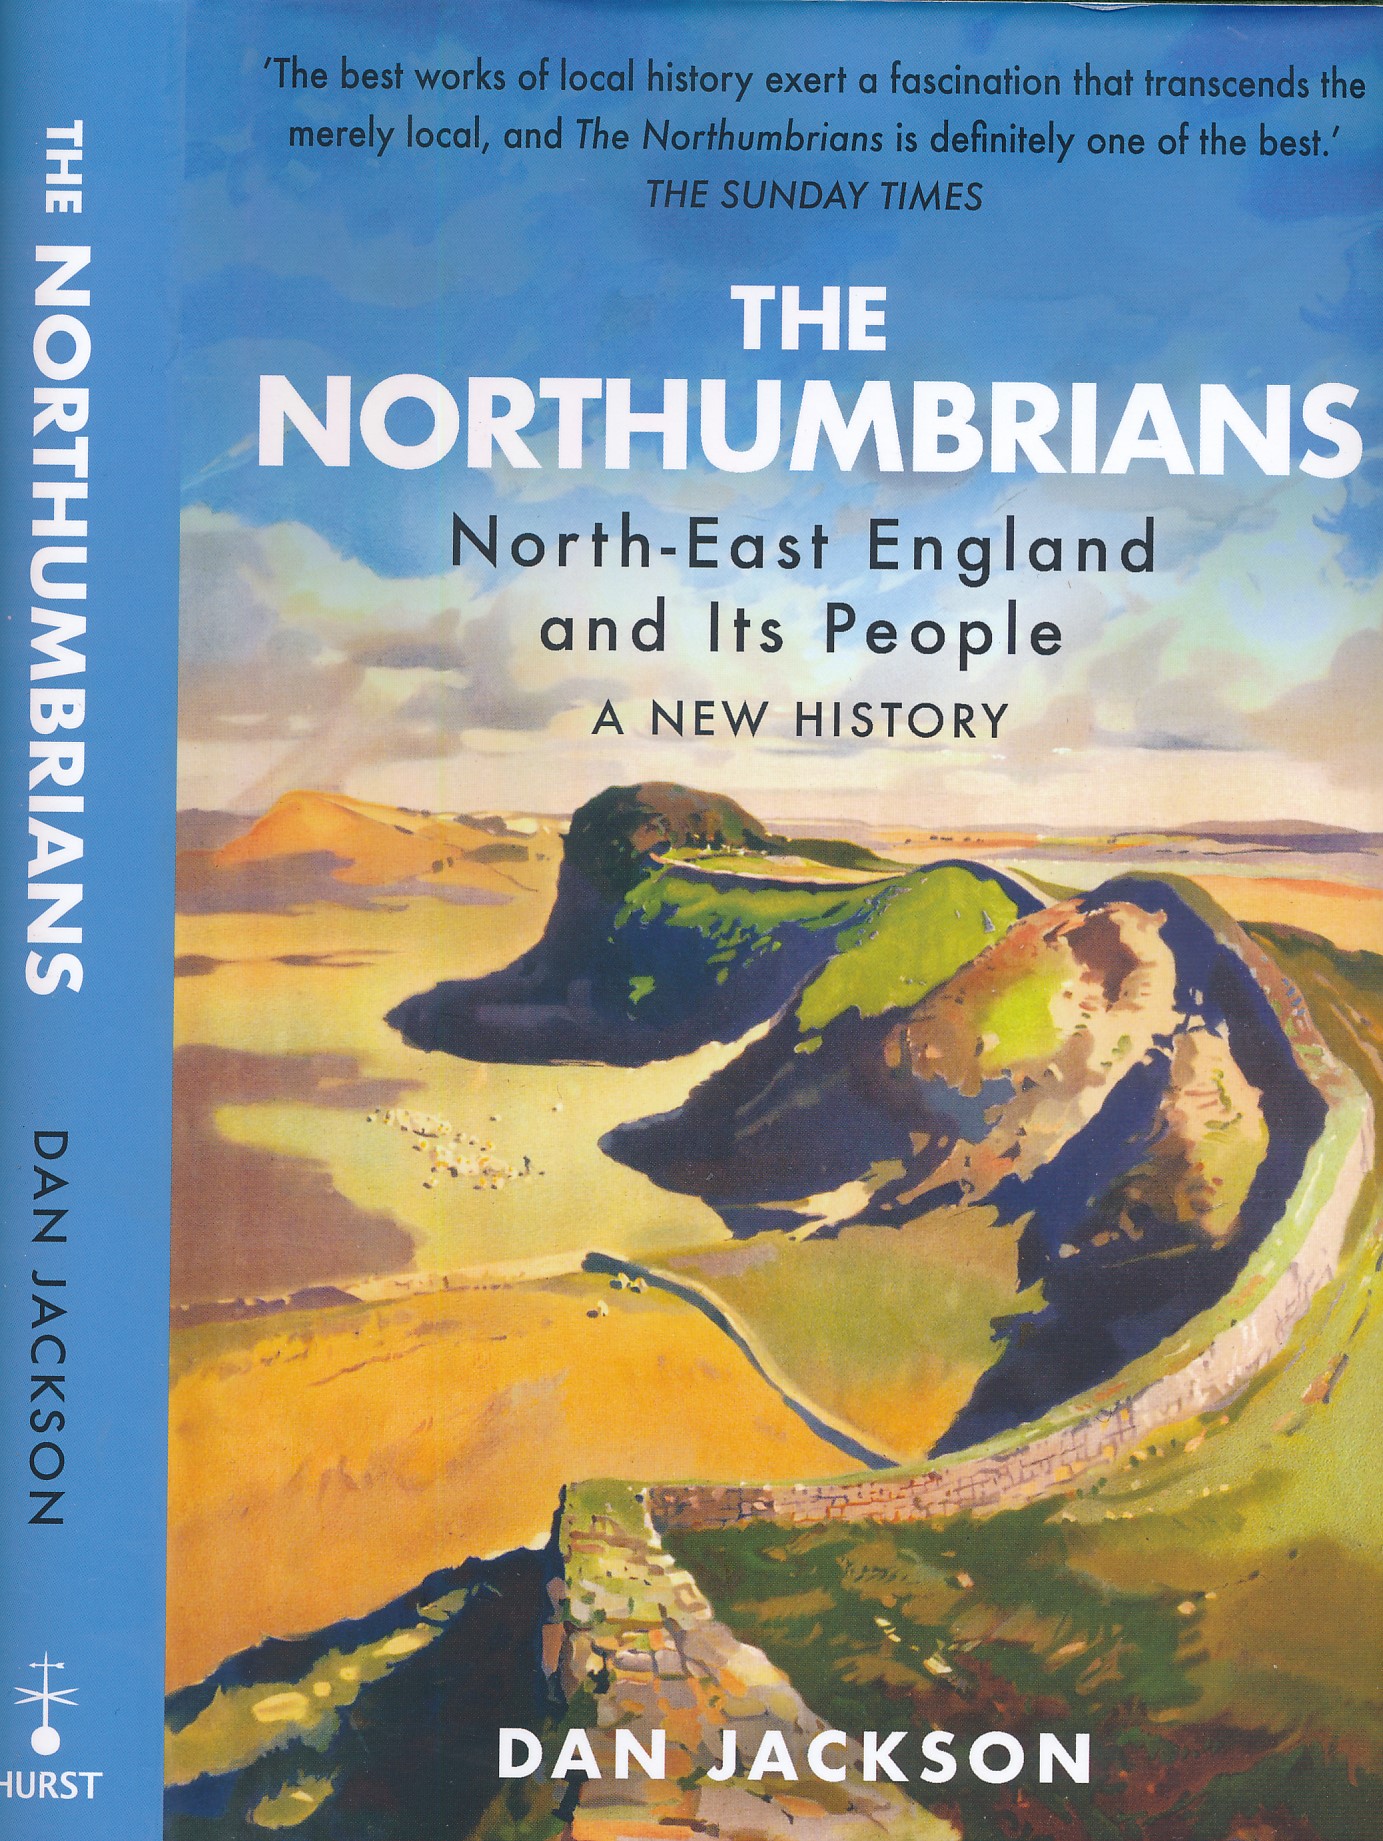 The Northumbrians. North-East England and its People. A New History.